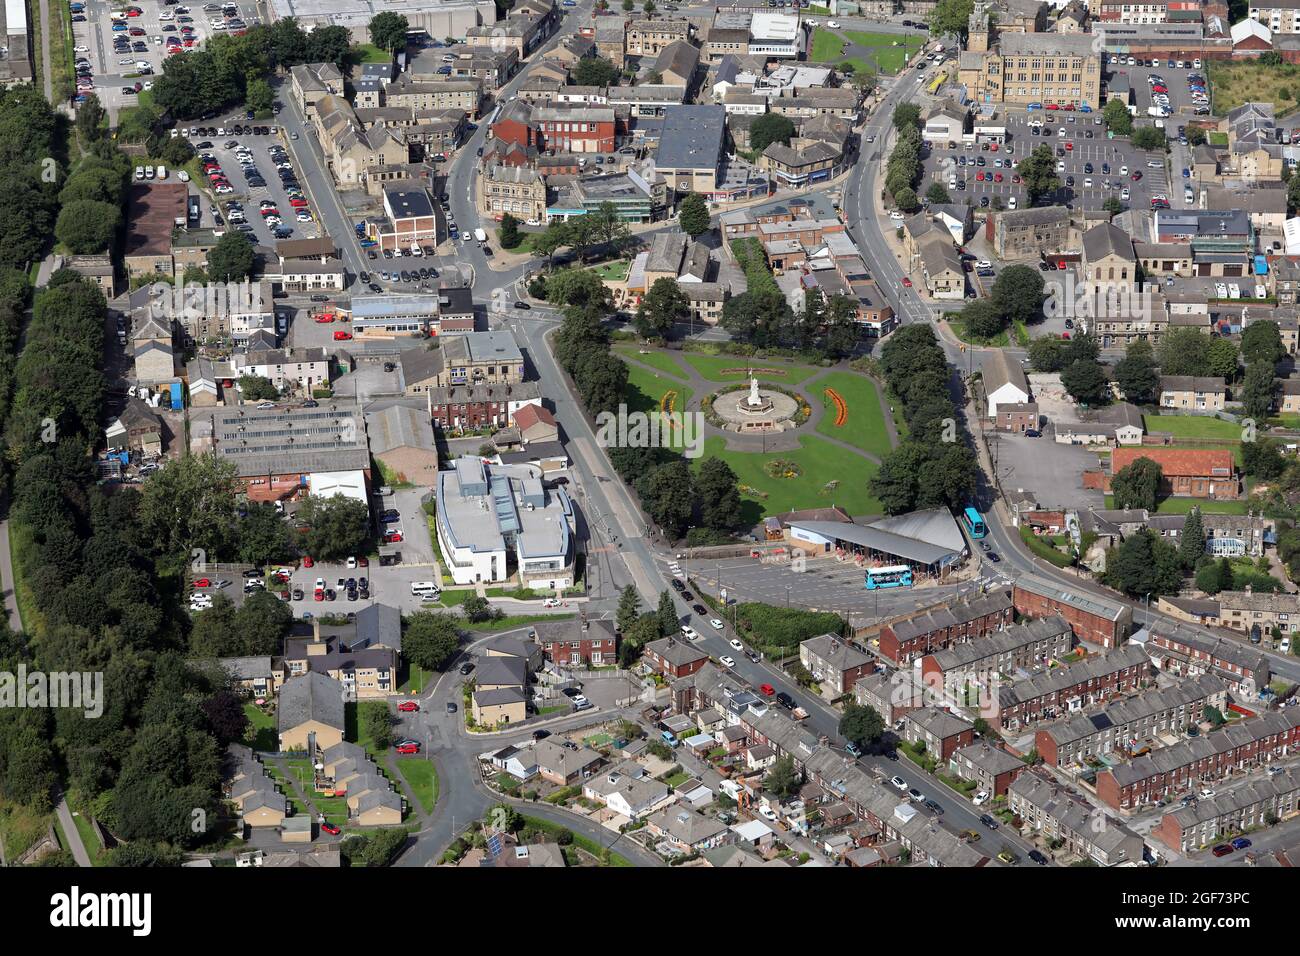 aerial view of Cleckheaton town centre with the Bus Station & King Edward VII Memorial Park prominent, Cleckheaton, West Yorkshire Stock Photo